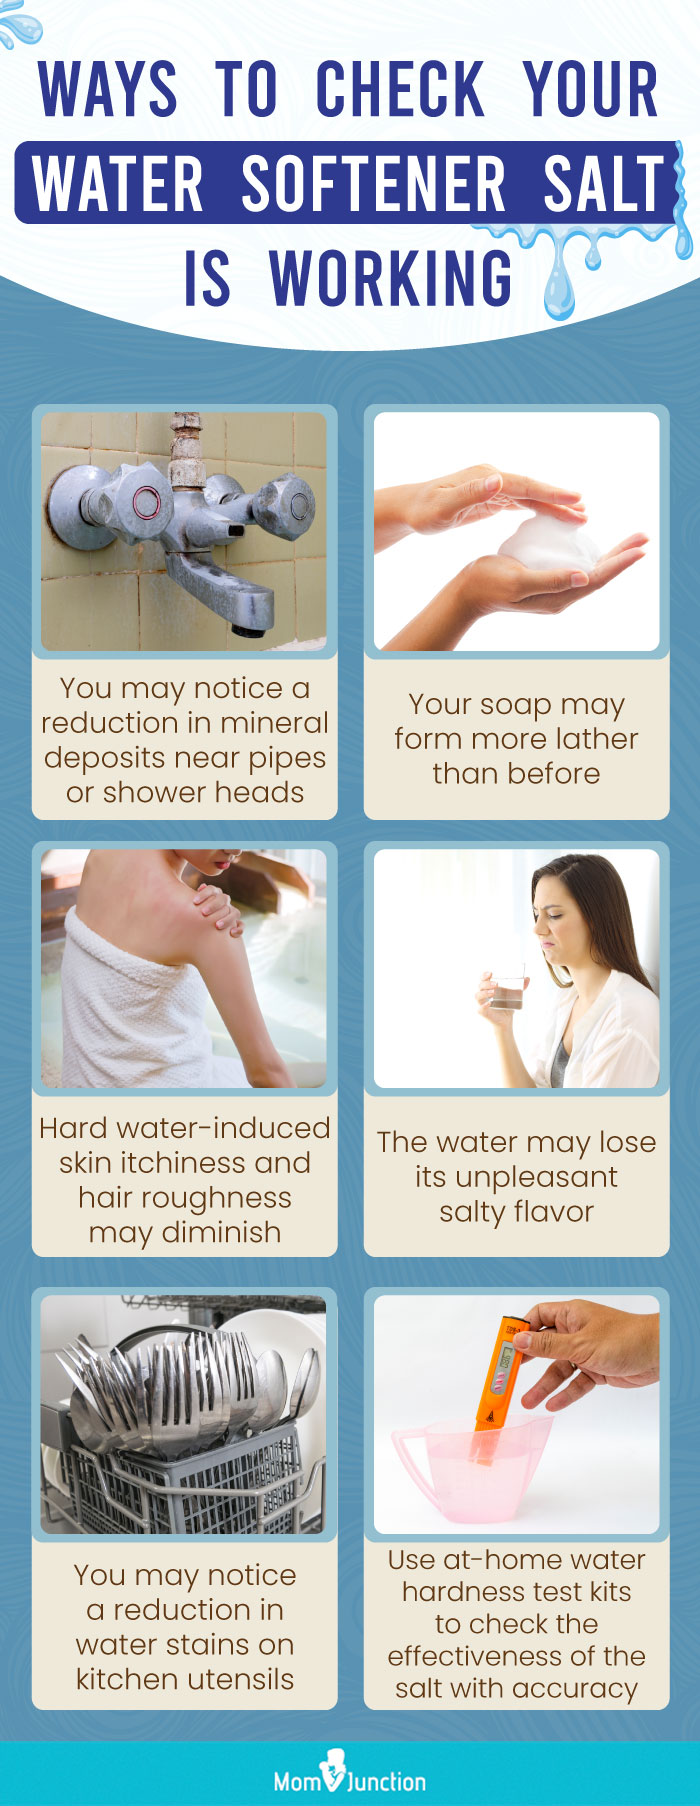 Ways To Check Your Water Softener Salt Is Working (infographic)